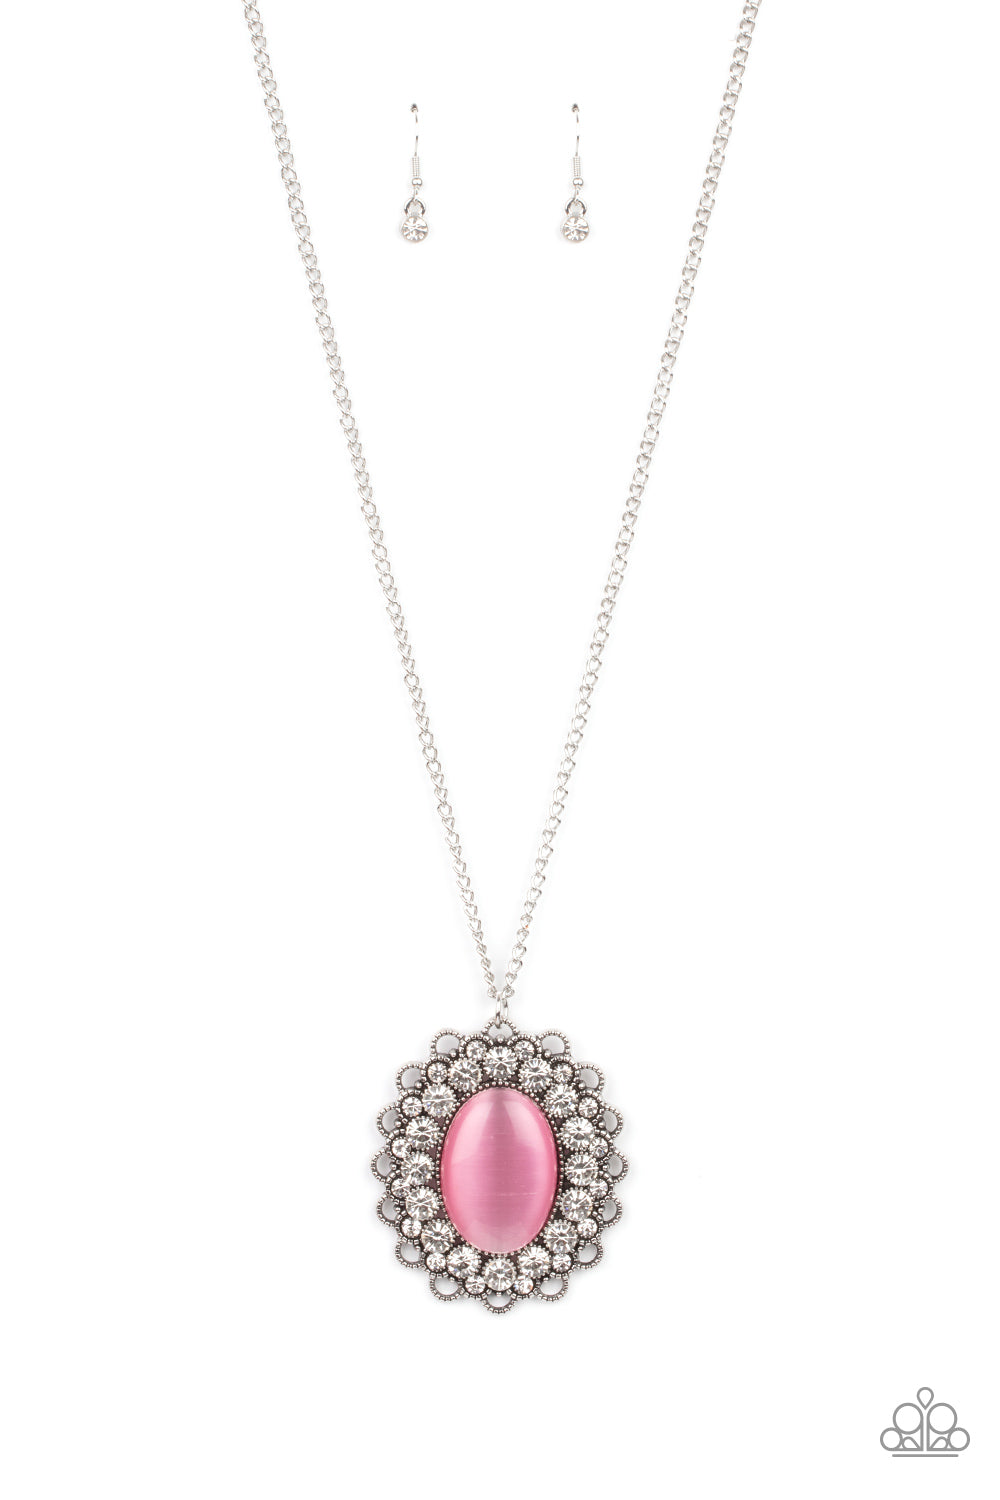 Oh My Medallion - Pink moonstone necklace